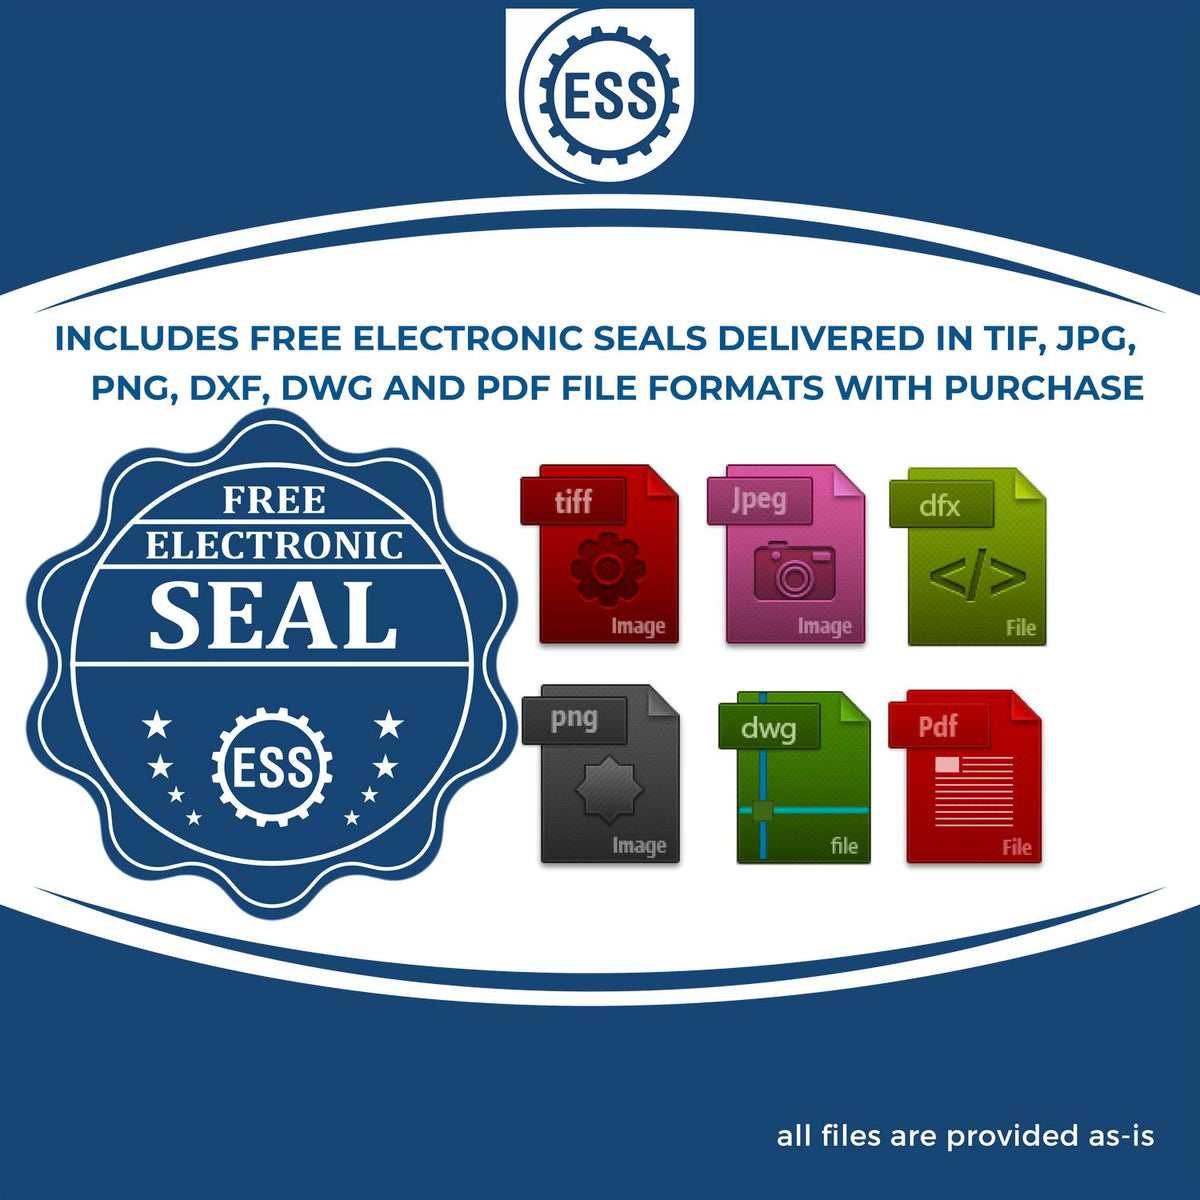 An infographic for the free electronic seal for the Soft Michigan Professional Engineer Seal illustrating the different file type icons such as DXF, DWG, TIF, JPG and PNG.